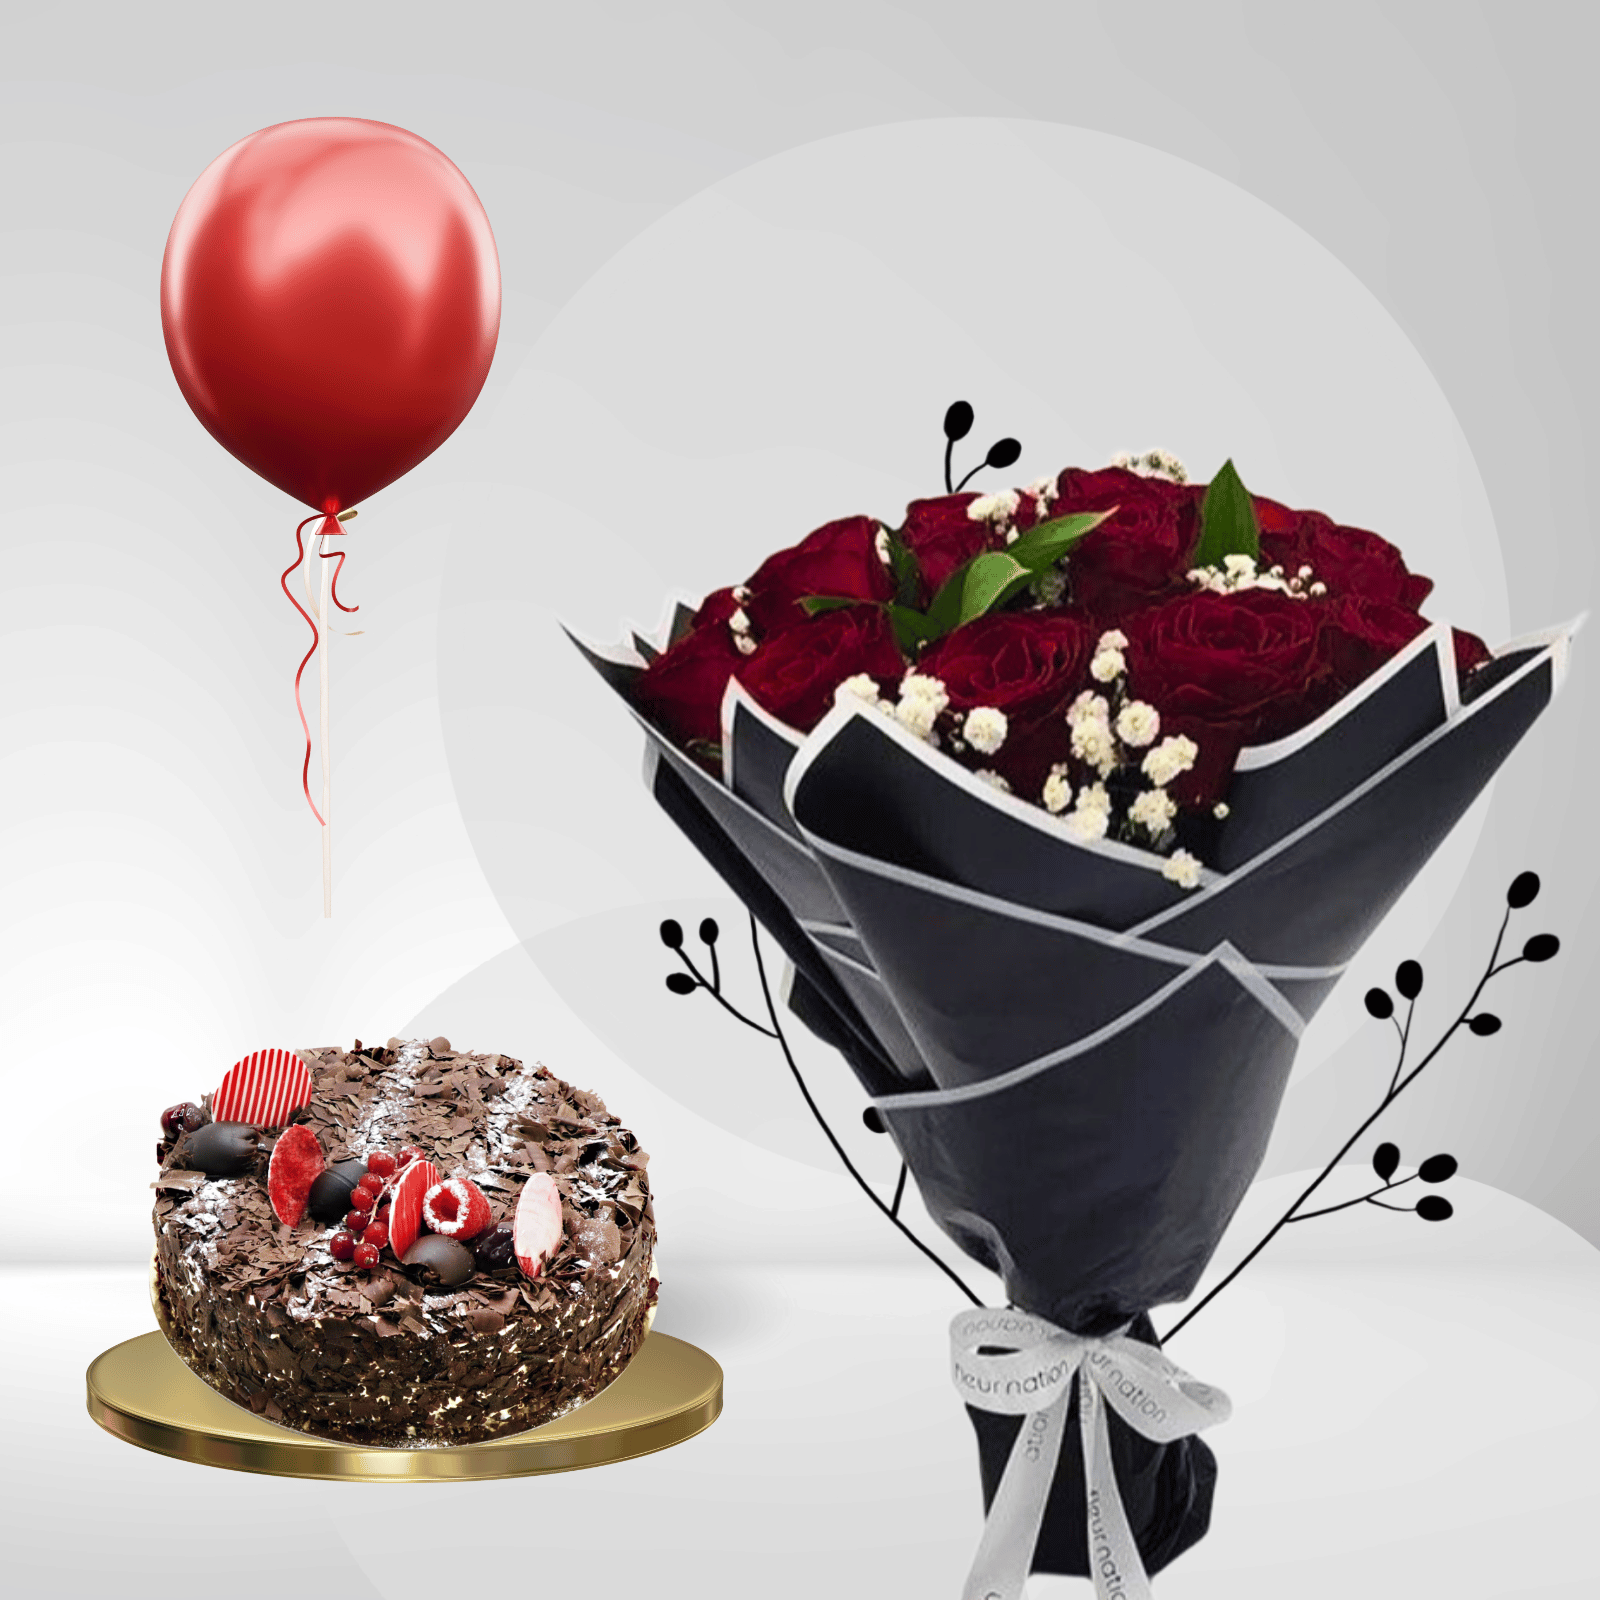 Flowers, Cakes & Balloons Sydney Delivery - WOWGIFTS 01 - Same Day Flower  Delivery Sydney